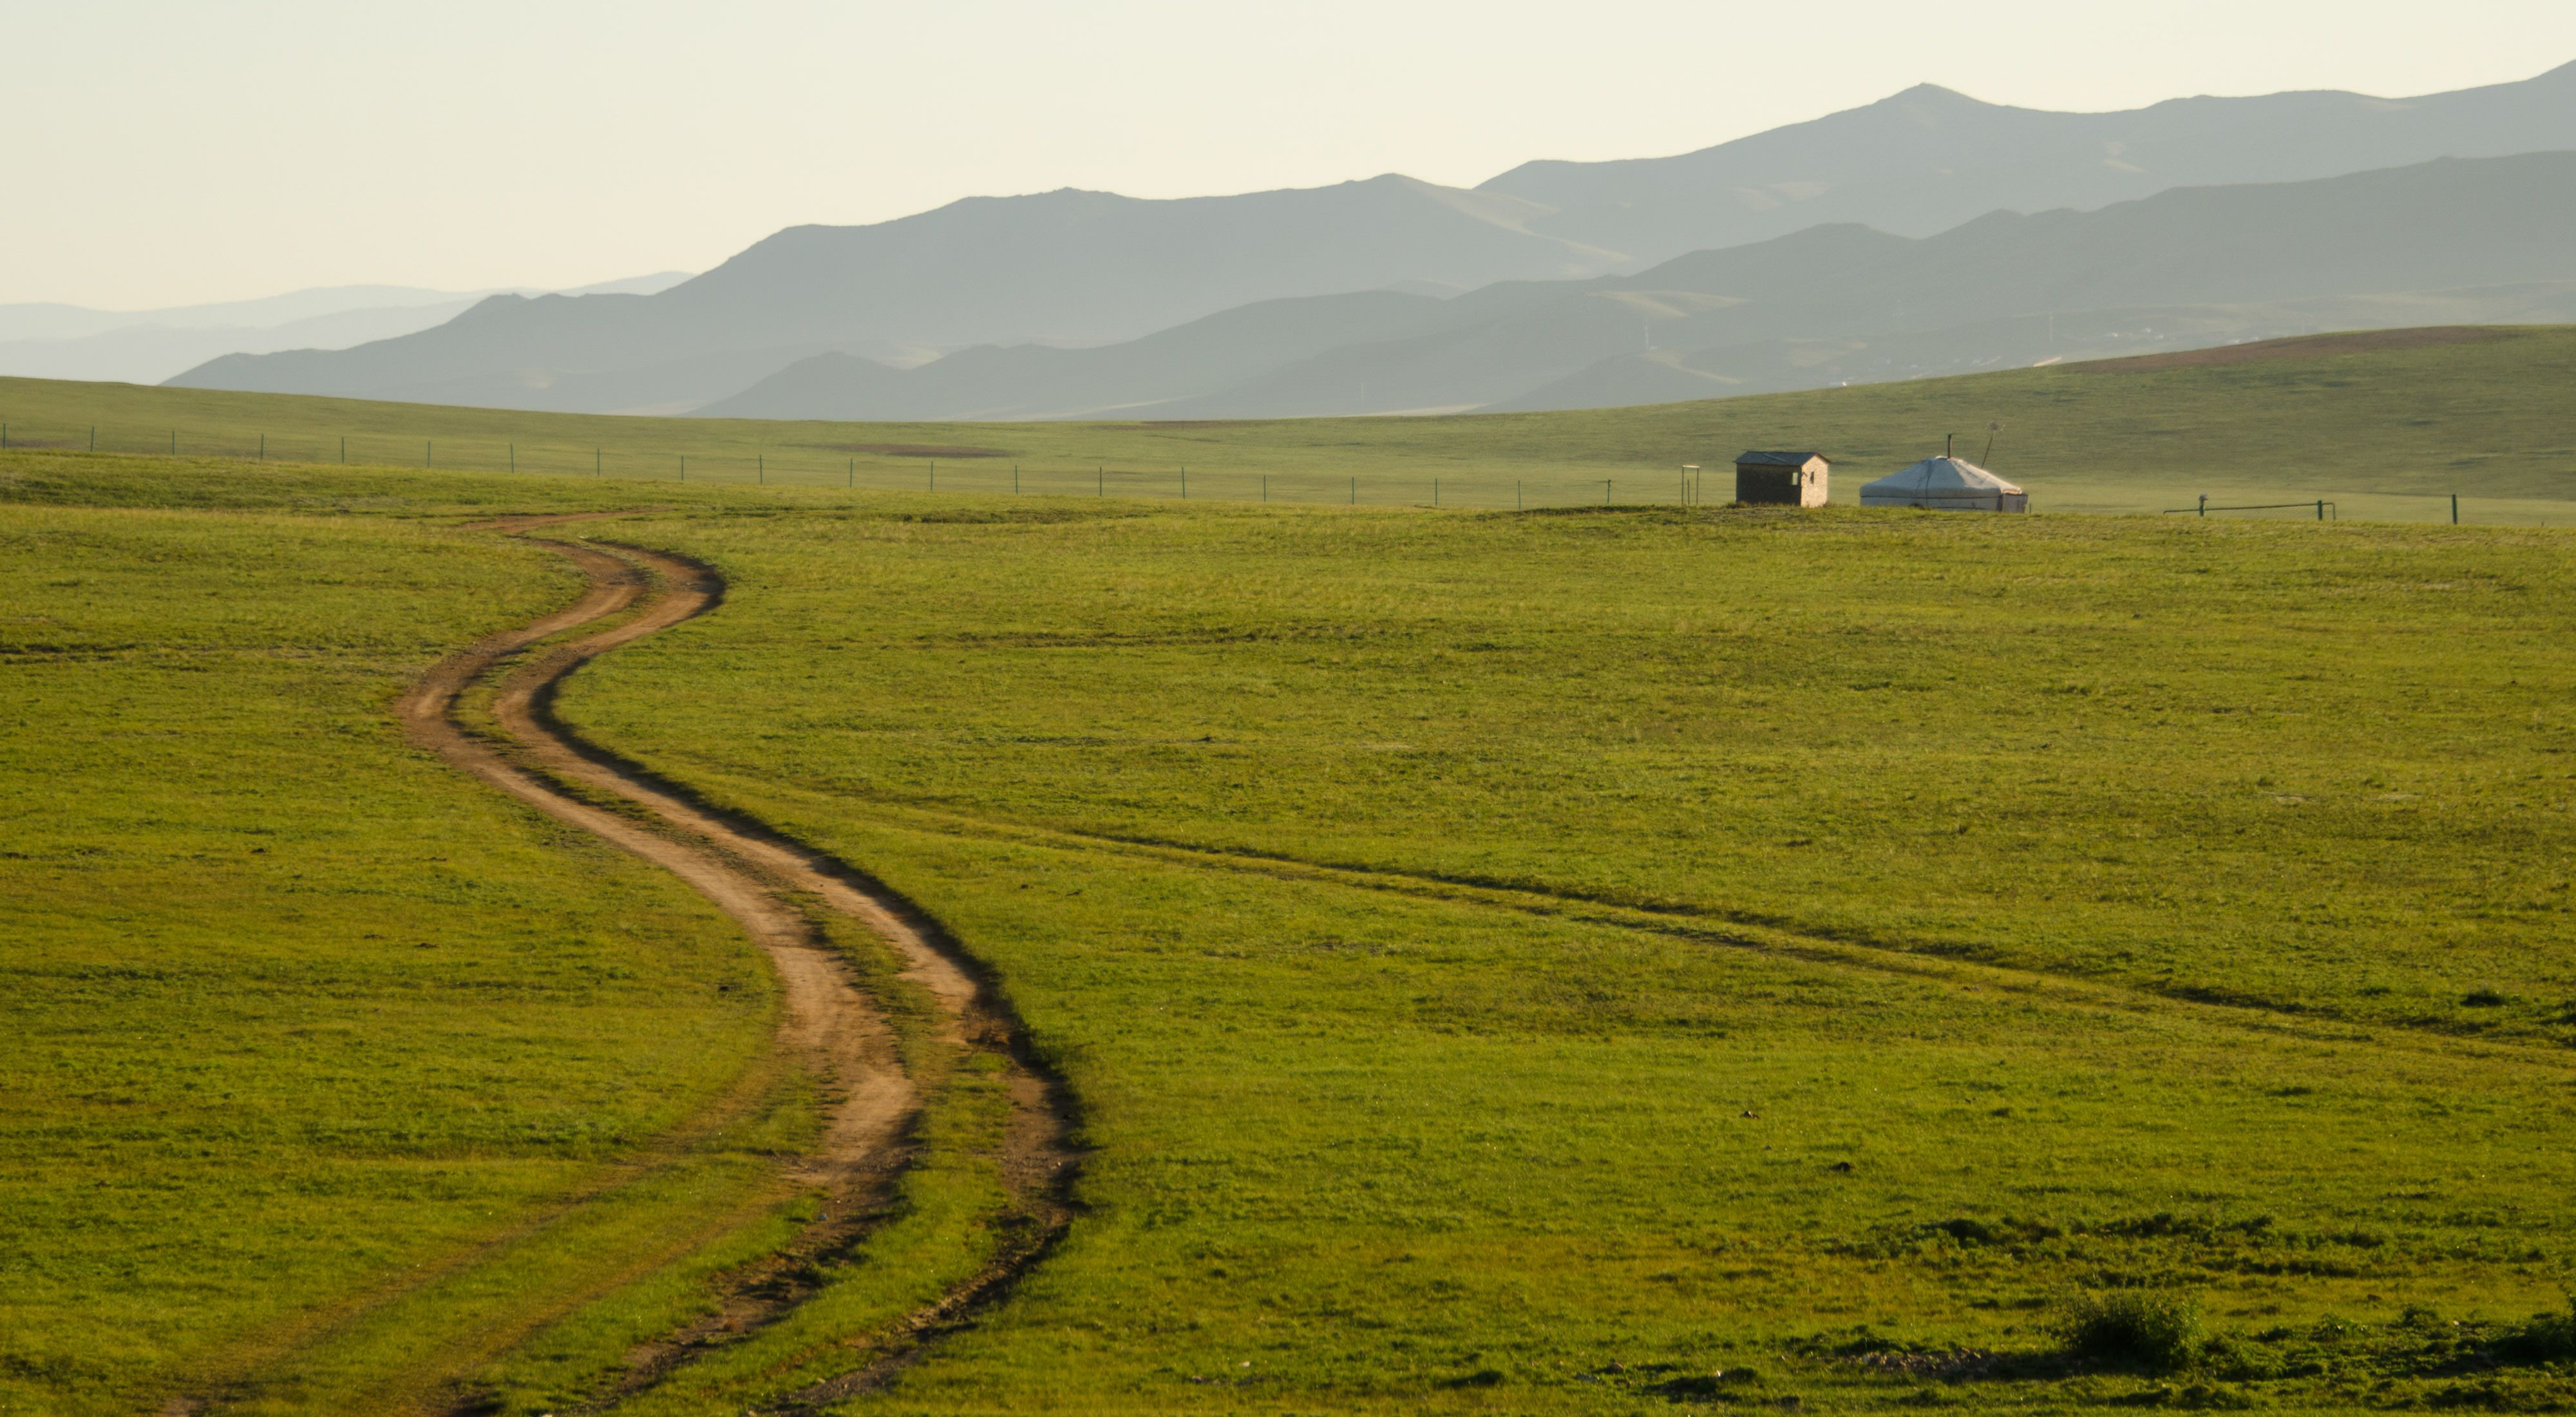 A dirt road winds through open green grassland with a yurt and an outbuilding in the middle ground and mountains in the far distance.